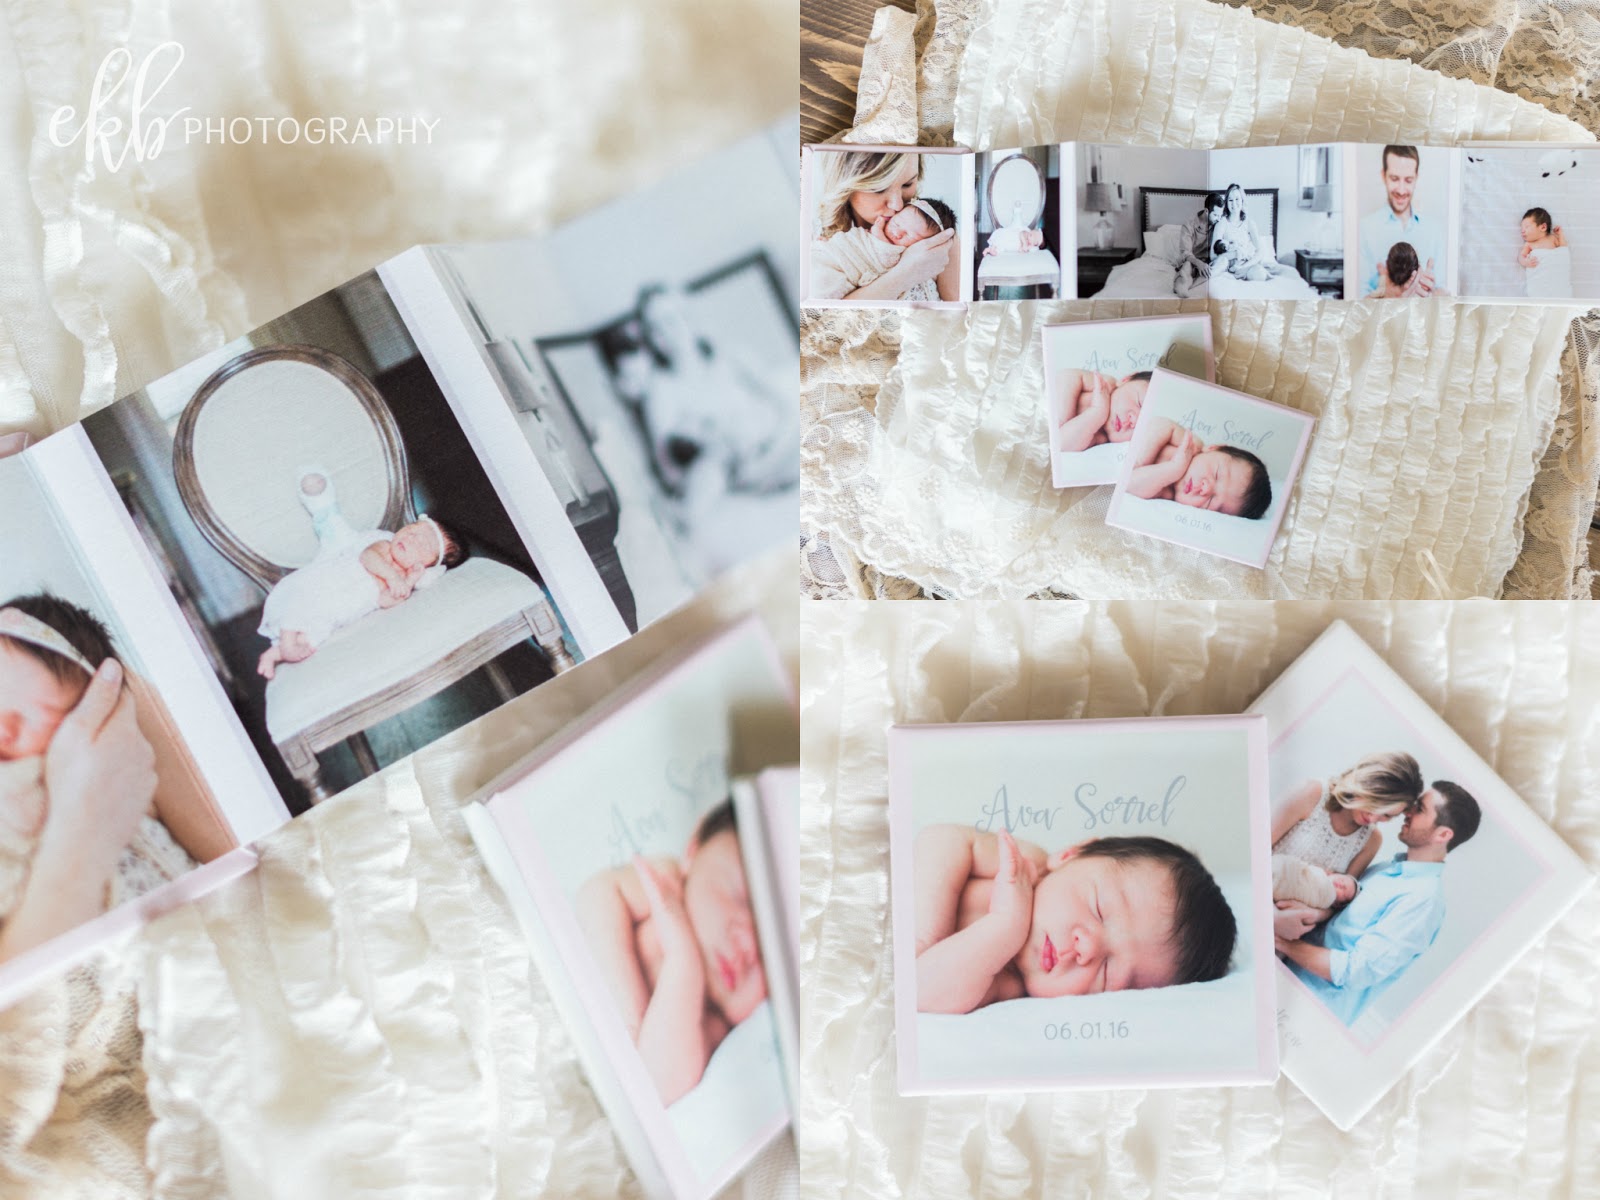 ekbphotography: pictures you can hold | accordion mini albums